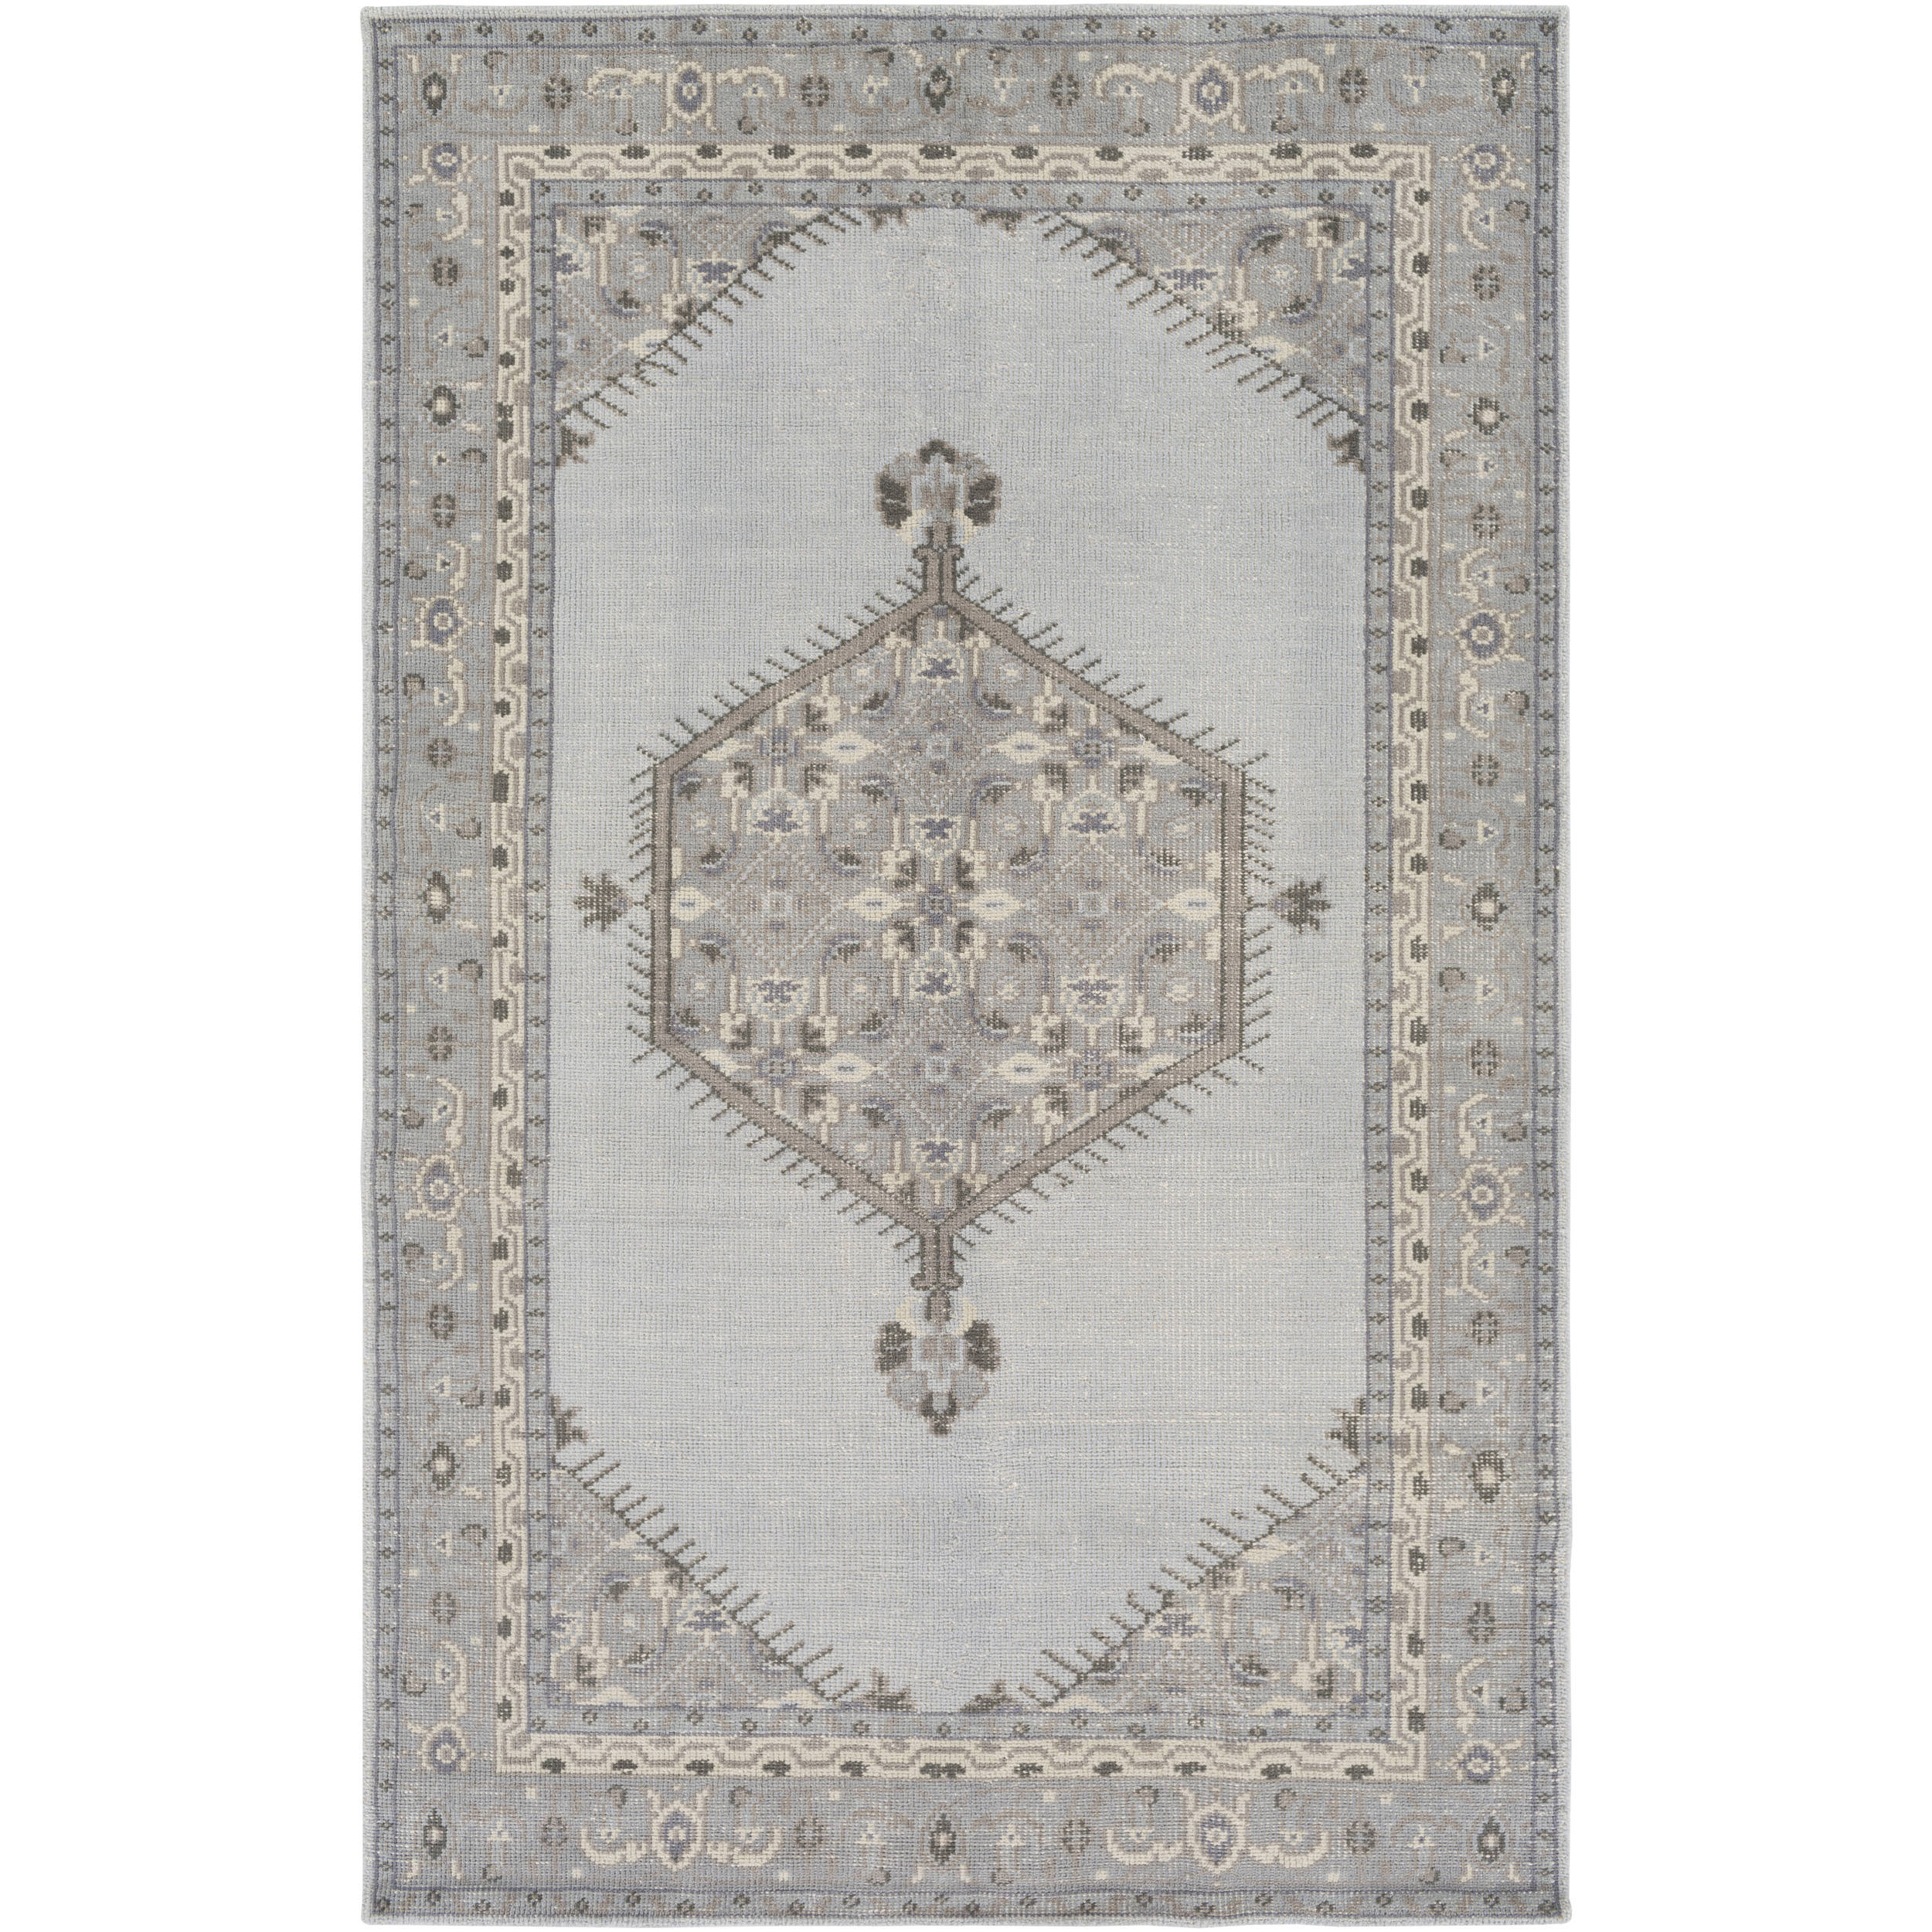 Hand-Knotted Loddon Border Wool Rug (2' x 3')